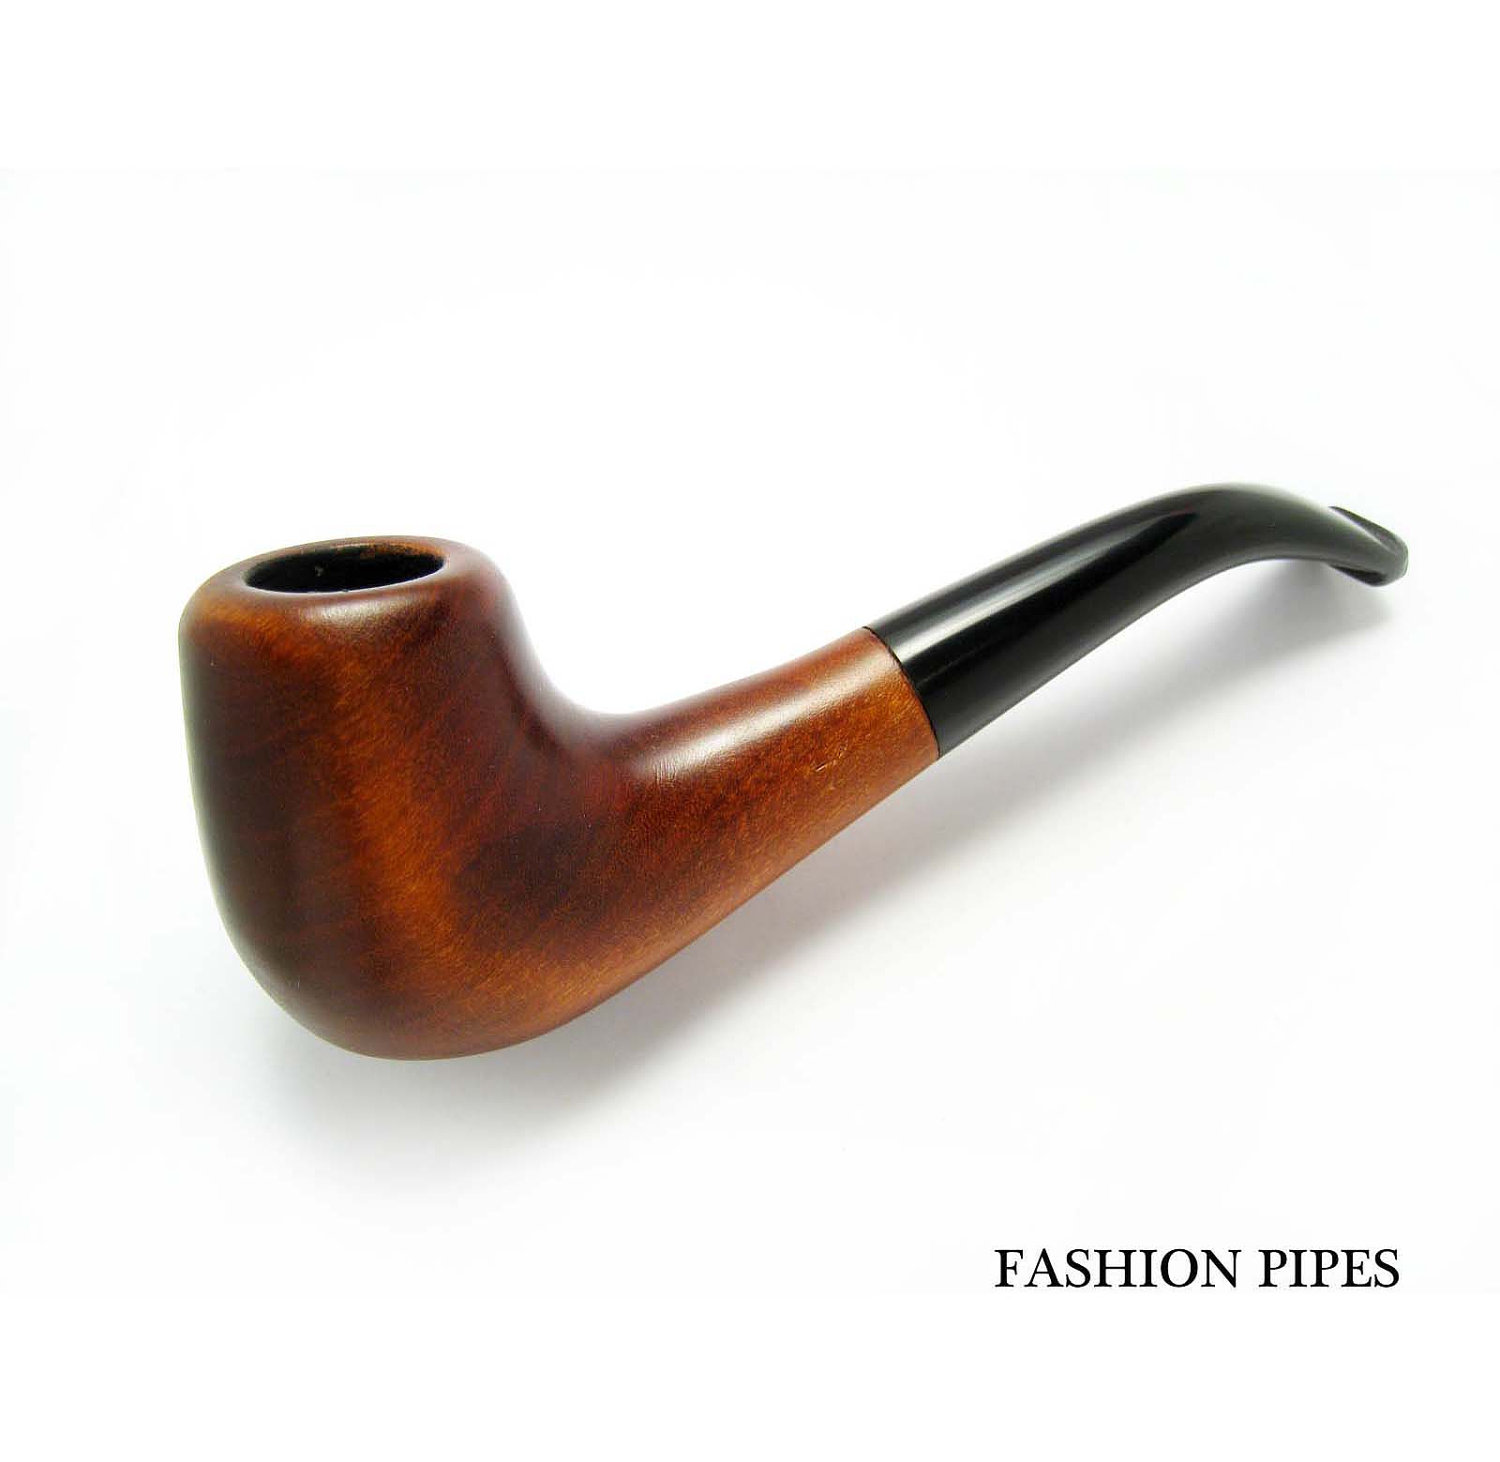 Popular items for handcrafted pipe on Etsy